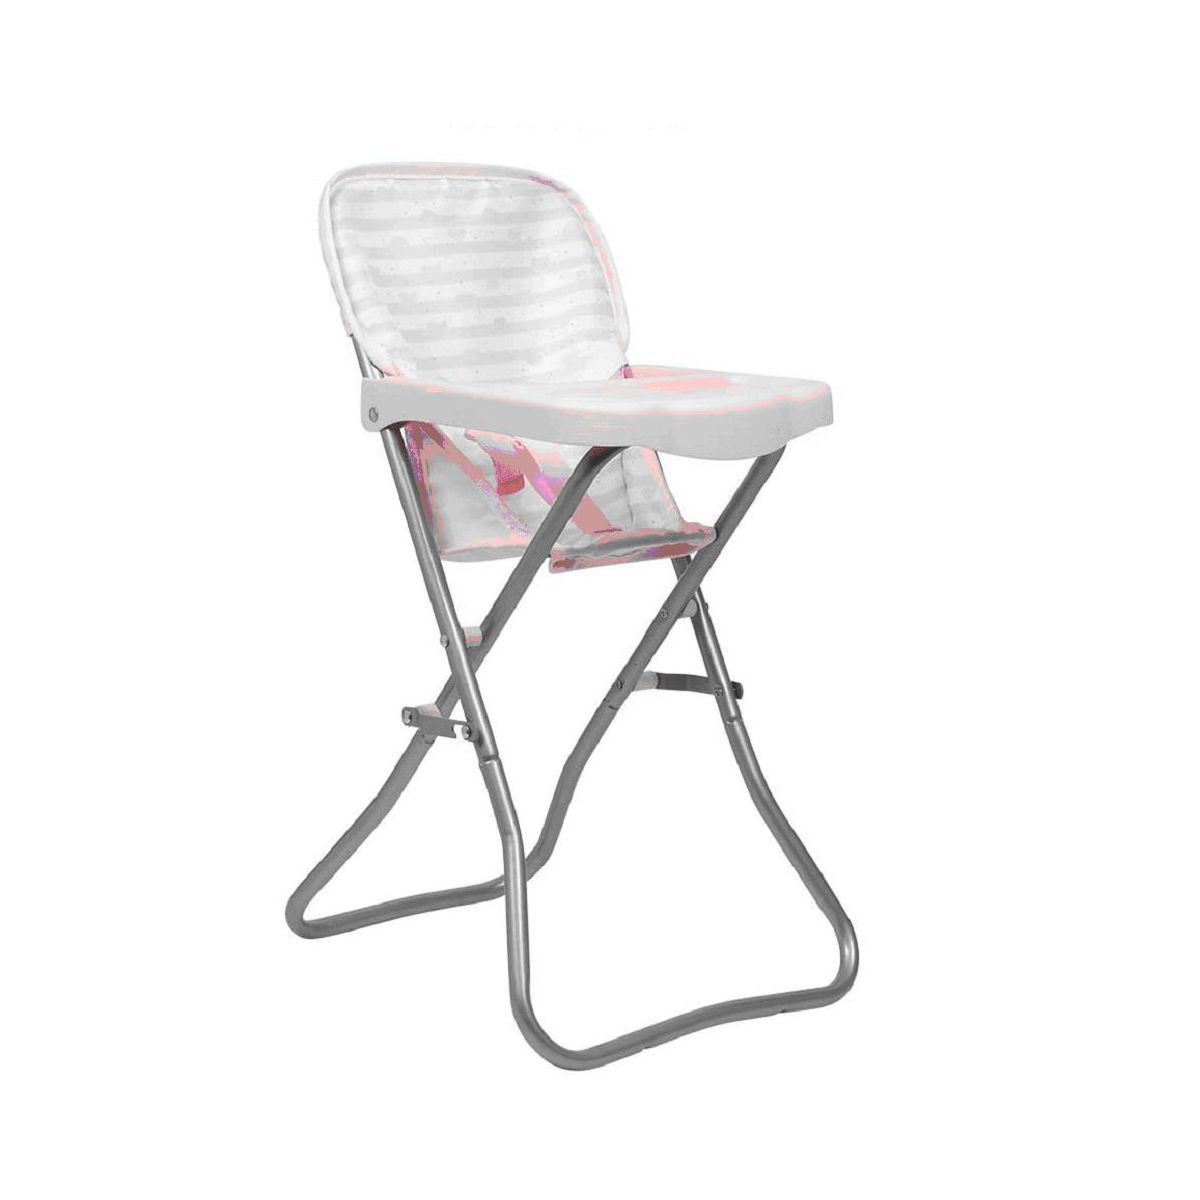 Adora Baby Doll High Chair - Pastel Pink Hearts | Target